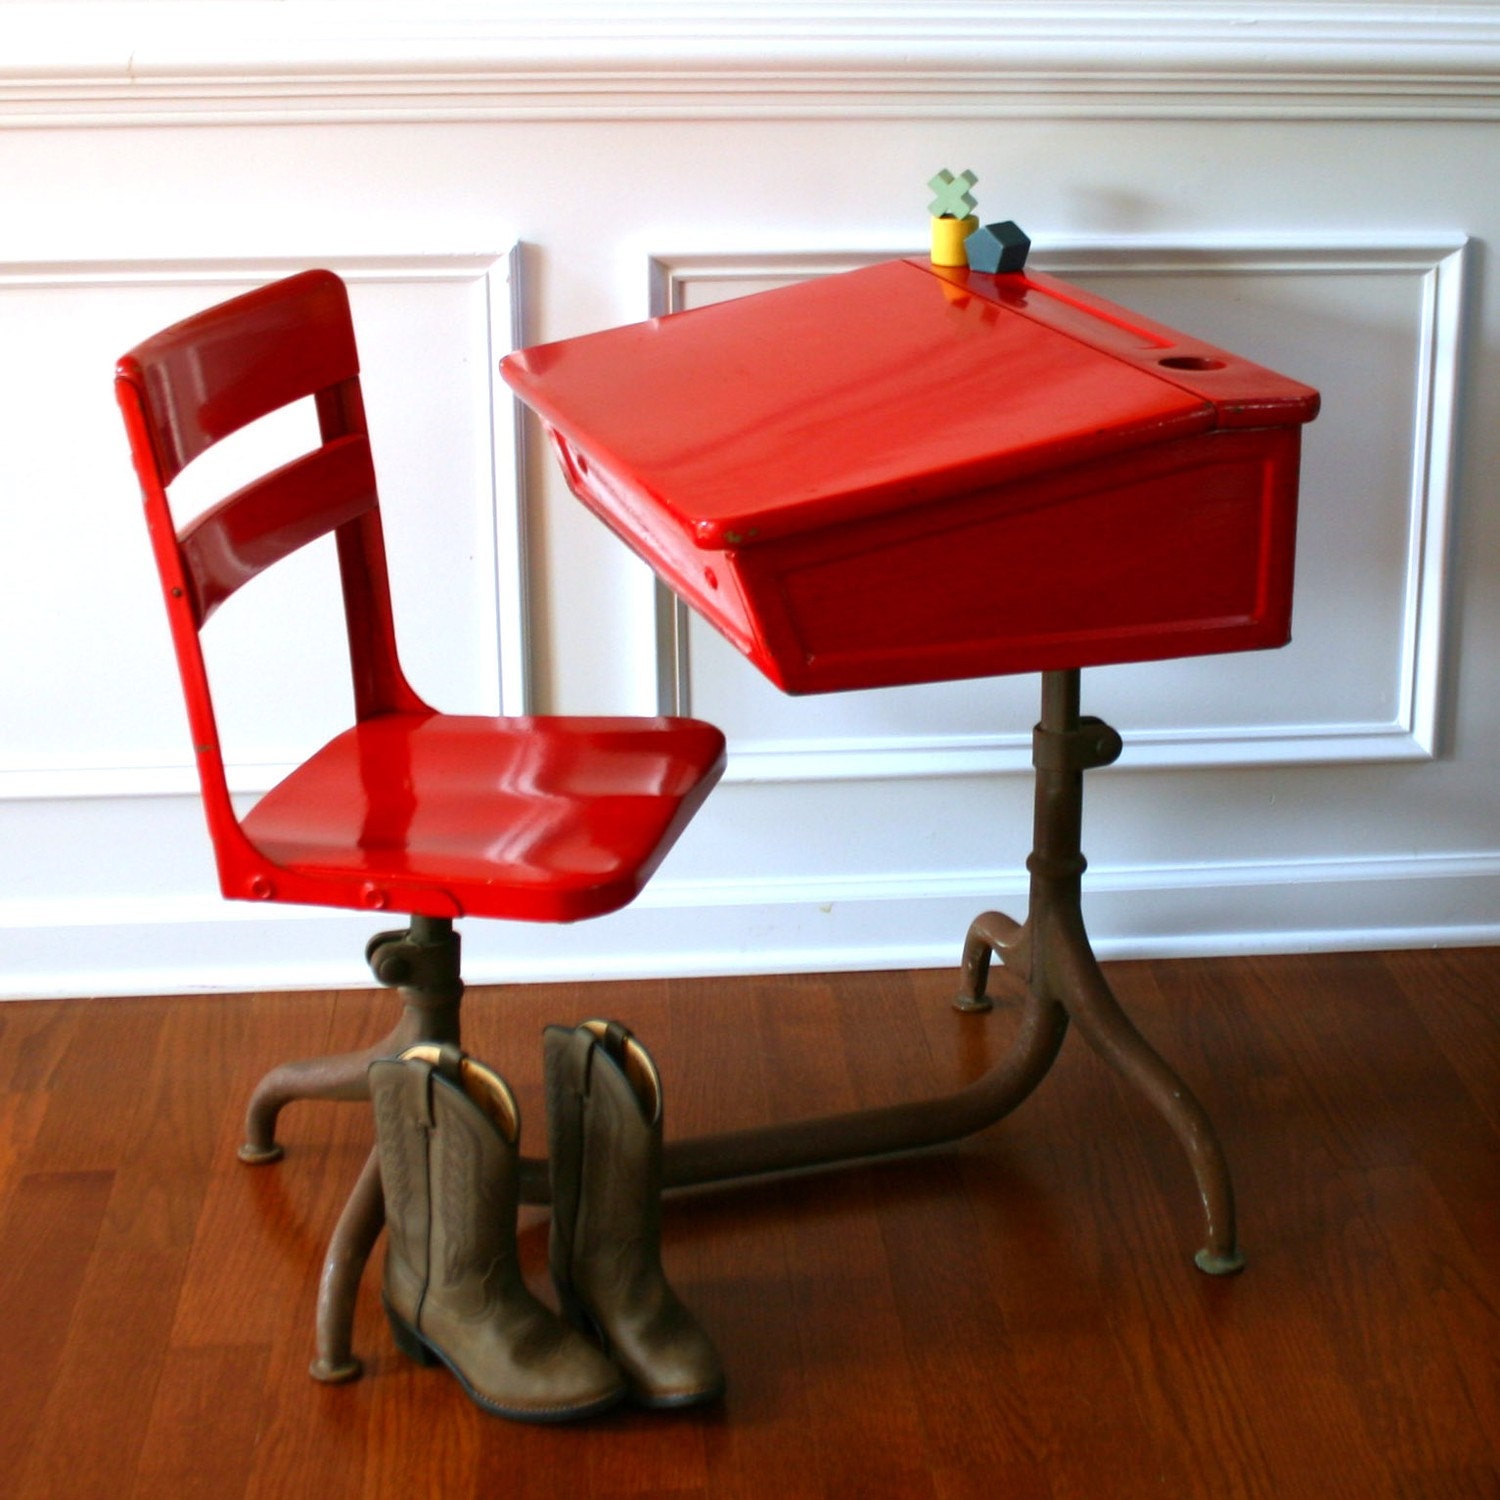 Inspired Learning. Vintage School Desk and Chair. Metal. Wooden. Fire Engine Red Elementary. Vintage Antiques by Rhapsody Attic on Etsy.